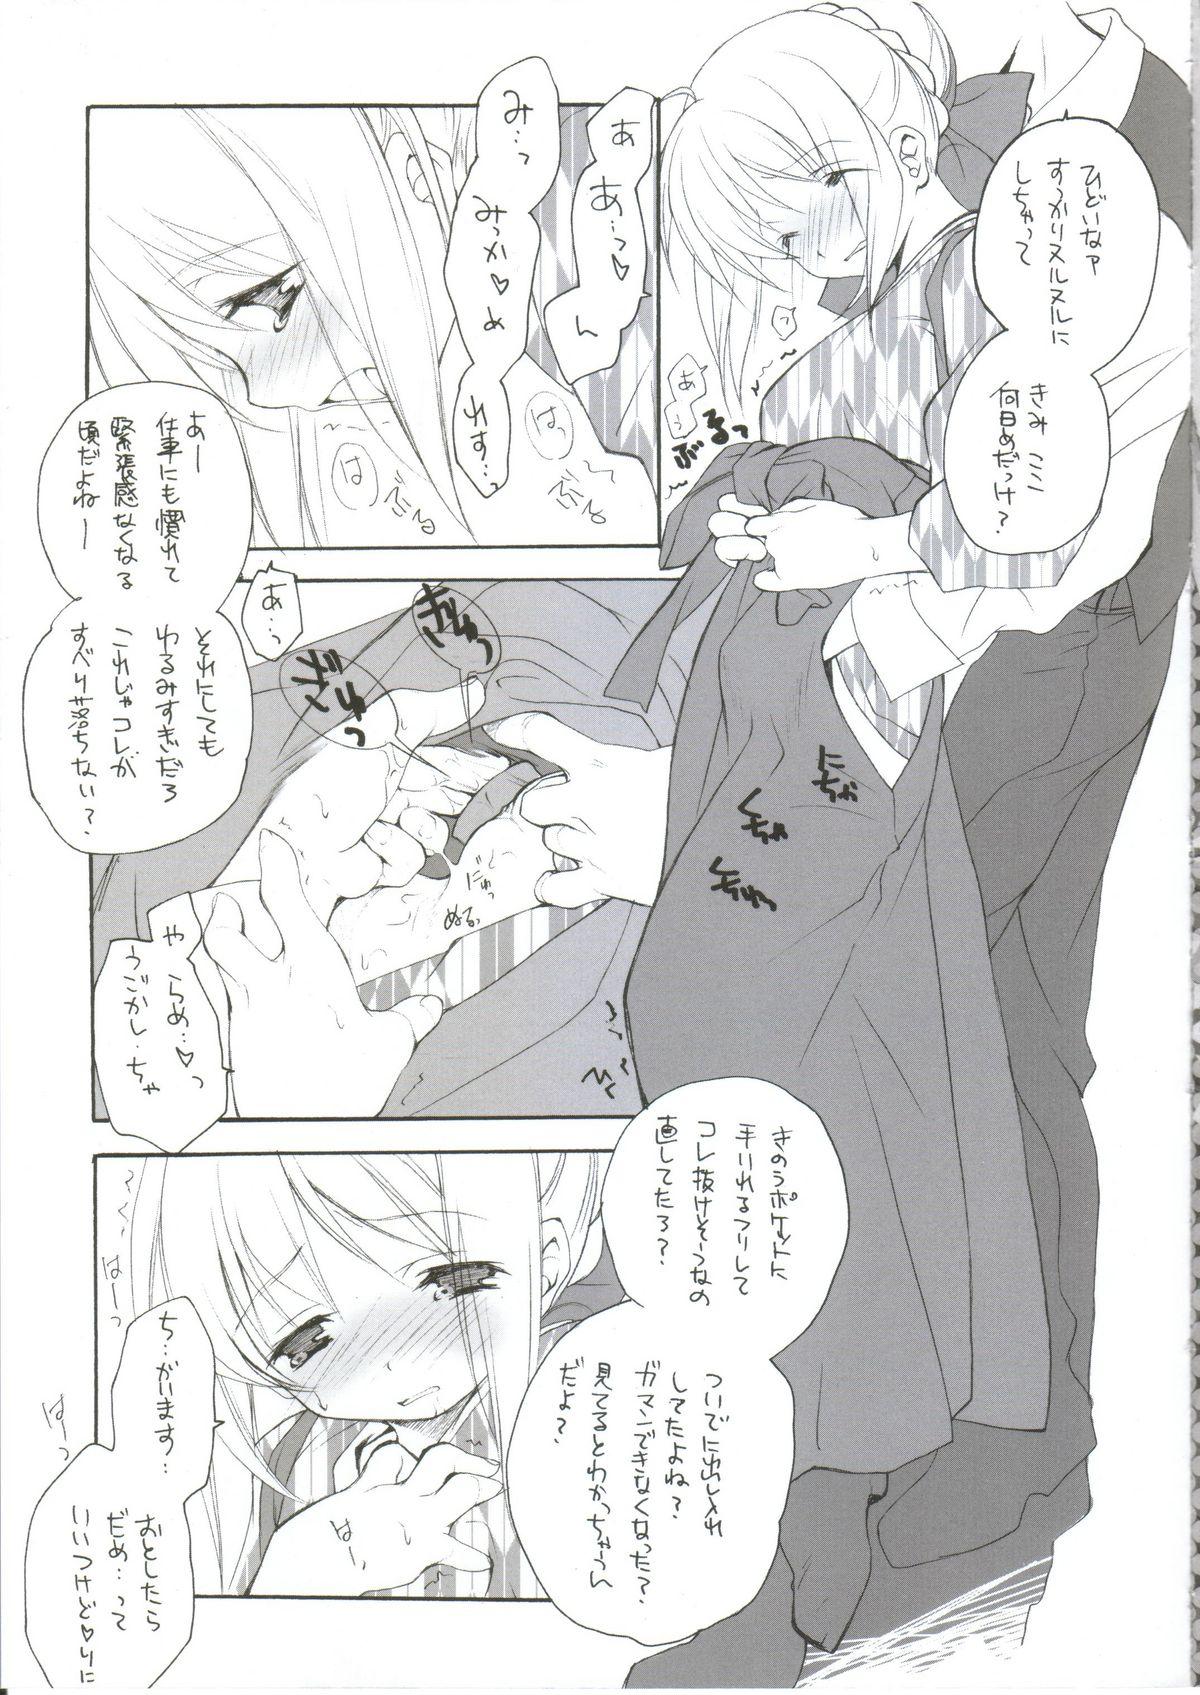 Oldyoung Citron Ribbon 9 - Fate stay night Novinhas - Page 4